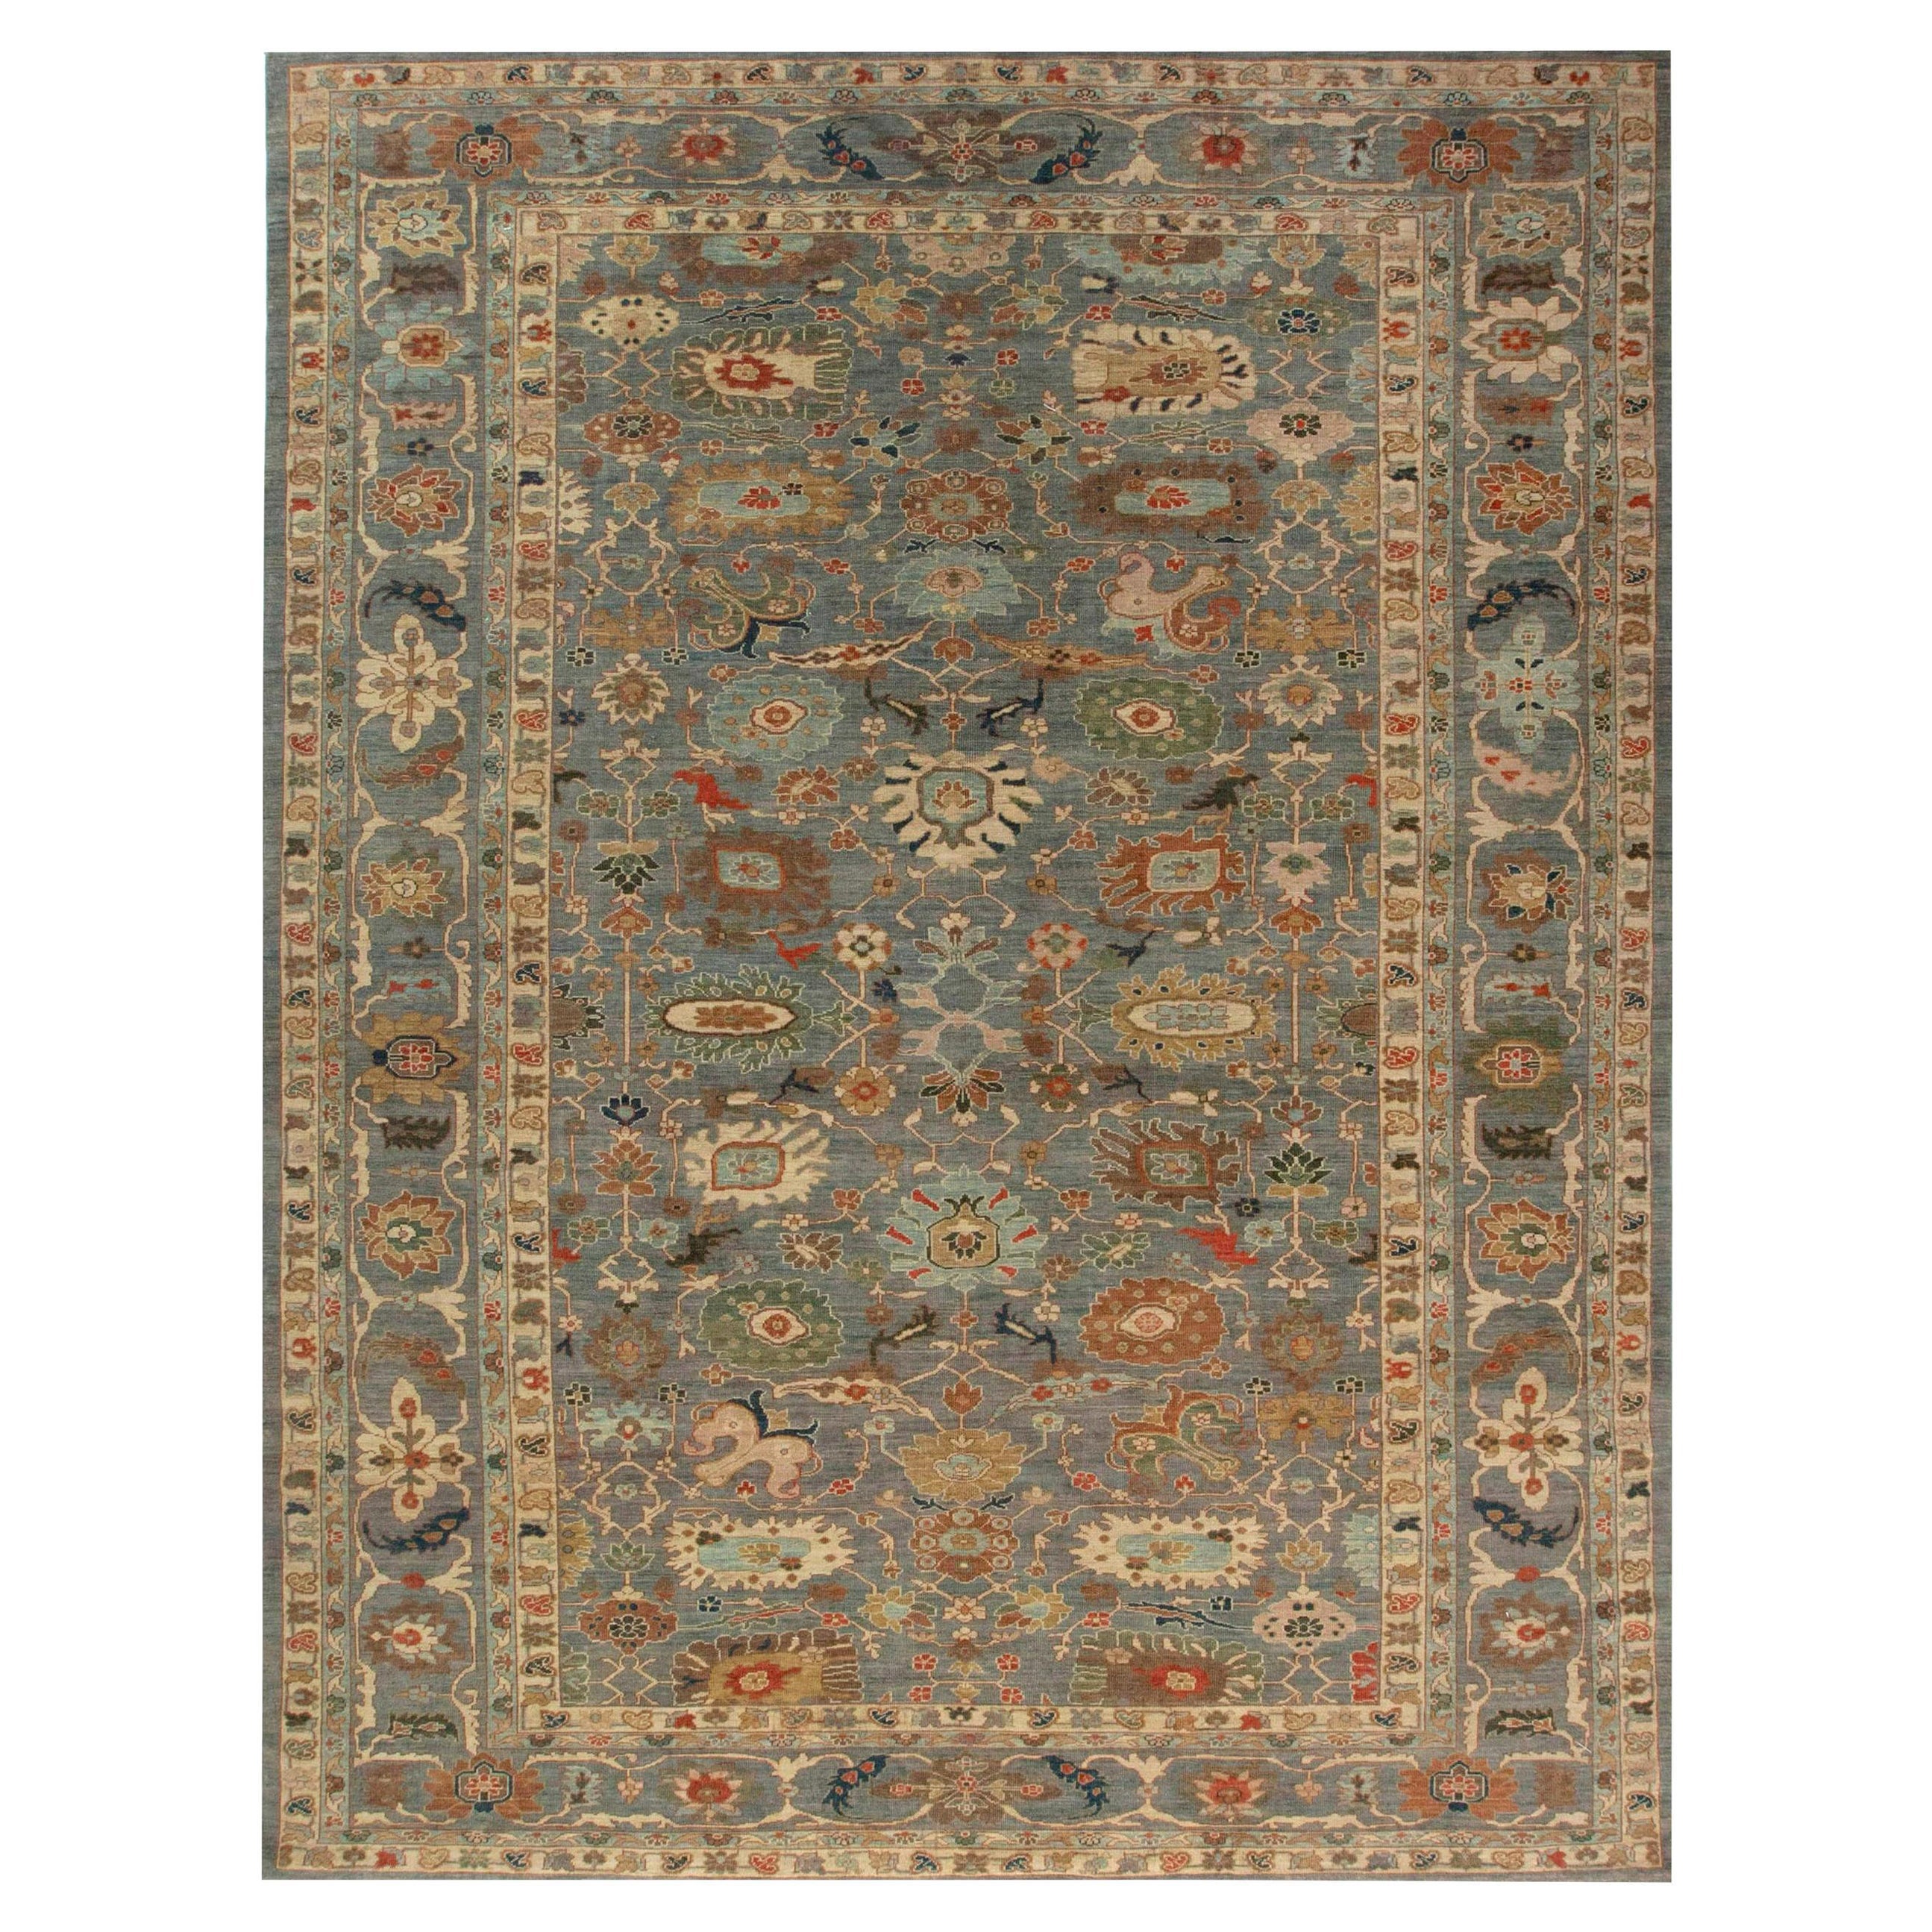 Traditional Sultanabad Design Blue and Grey Rug by Doris Leslie Blau